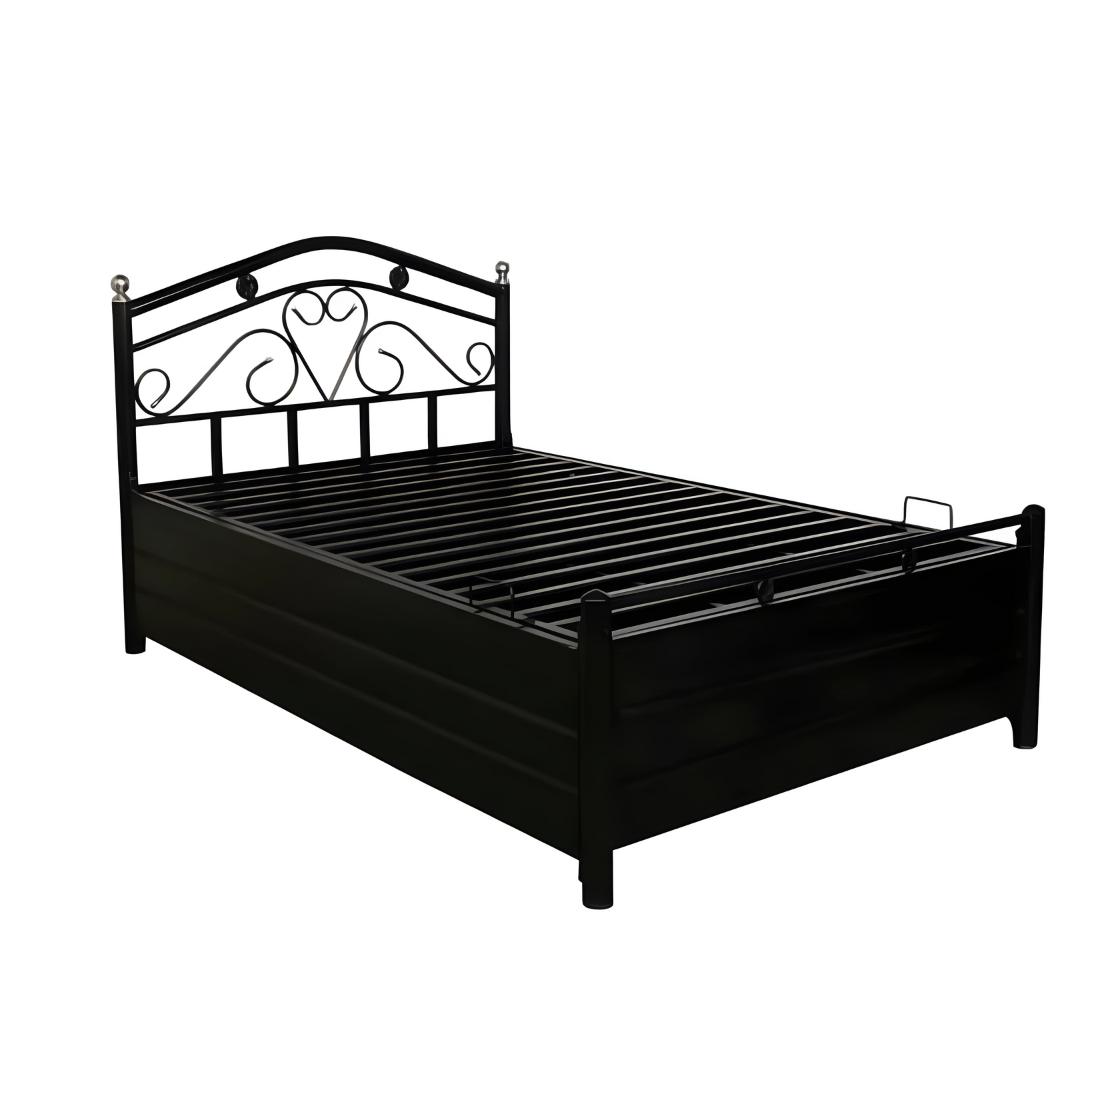 Dove Hydraulic Storage Double Metal Bed (Color - Black) with Designer Headrest